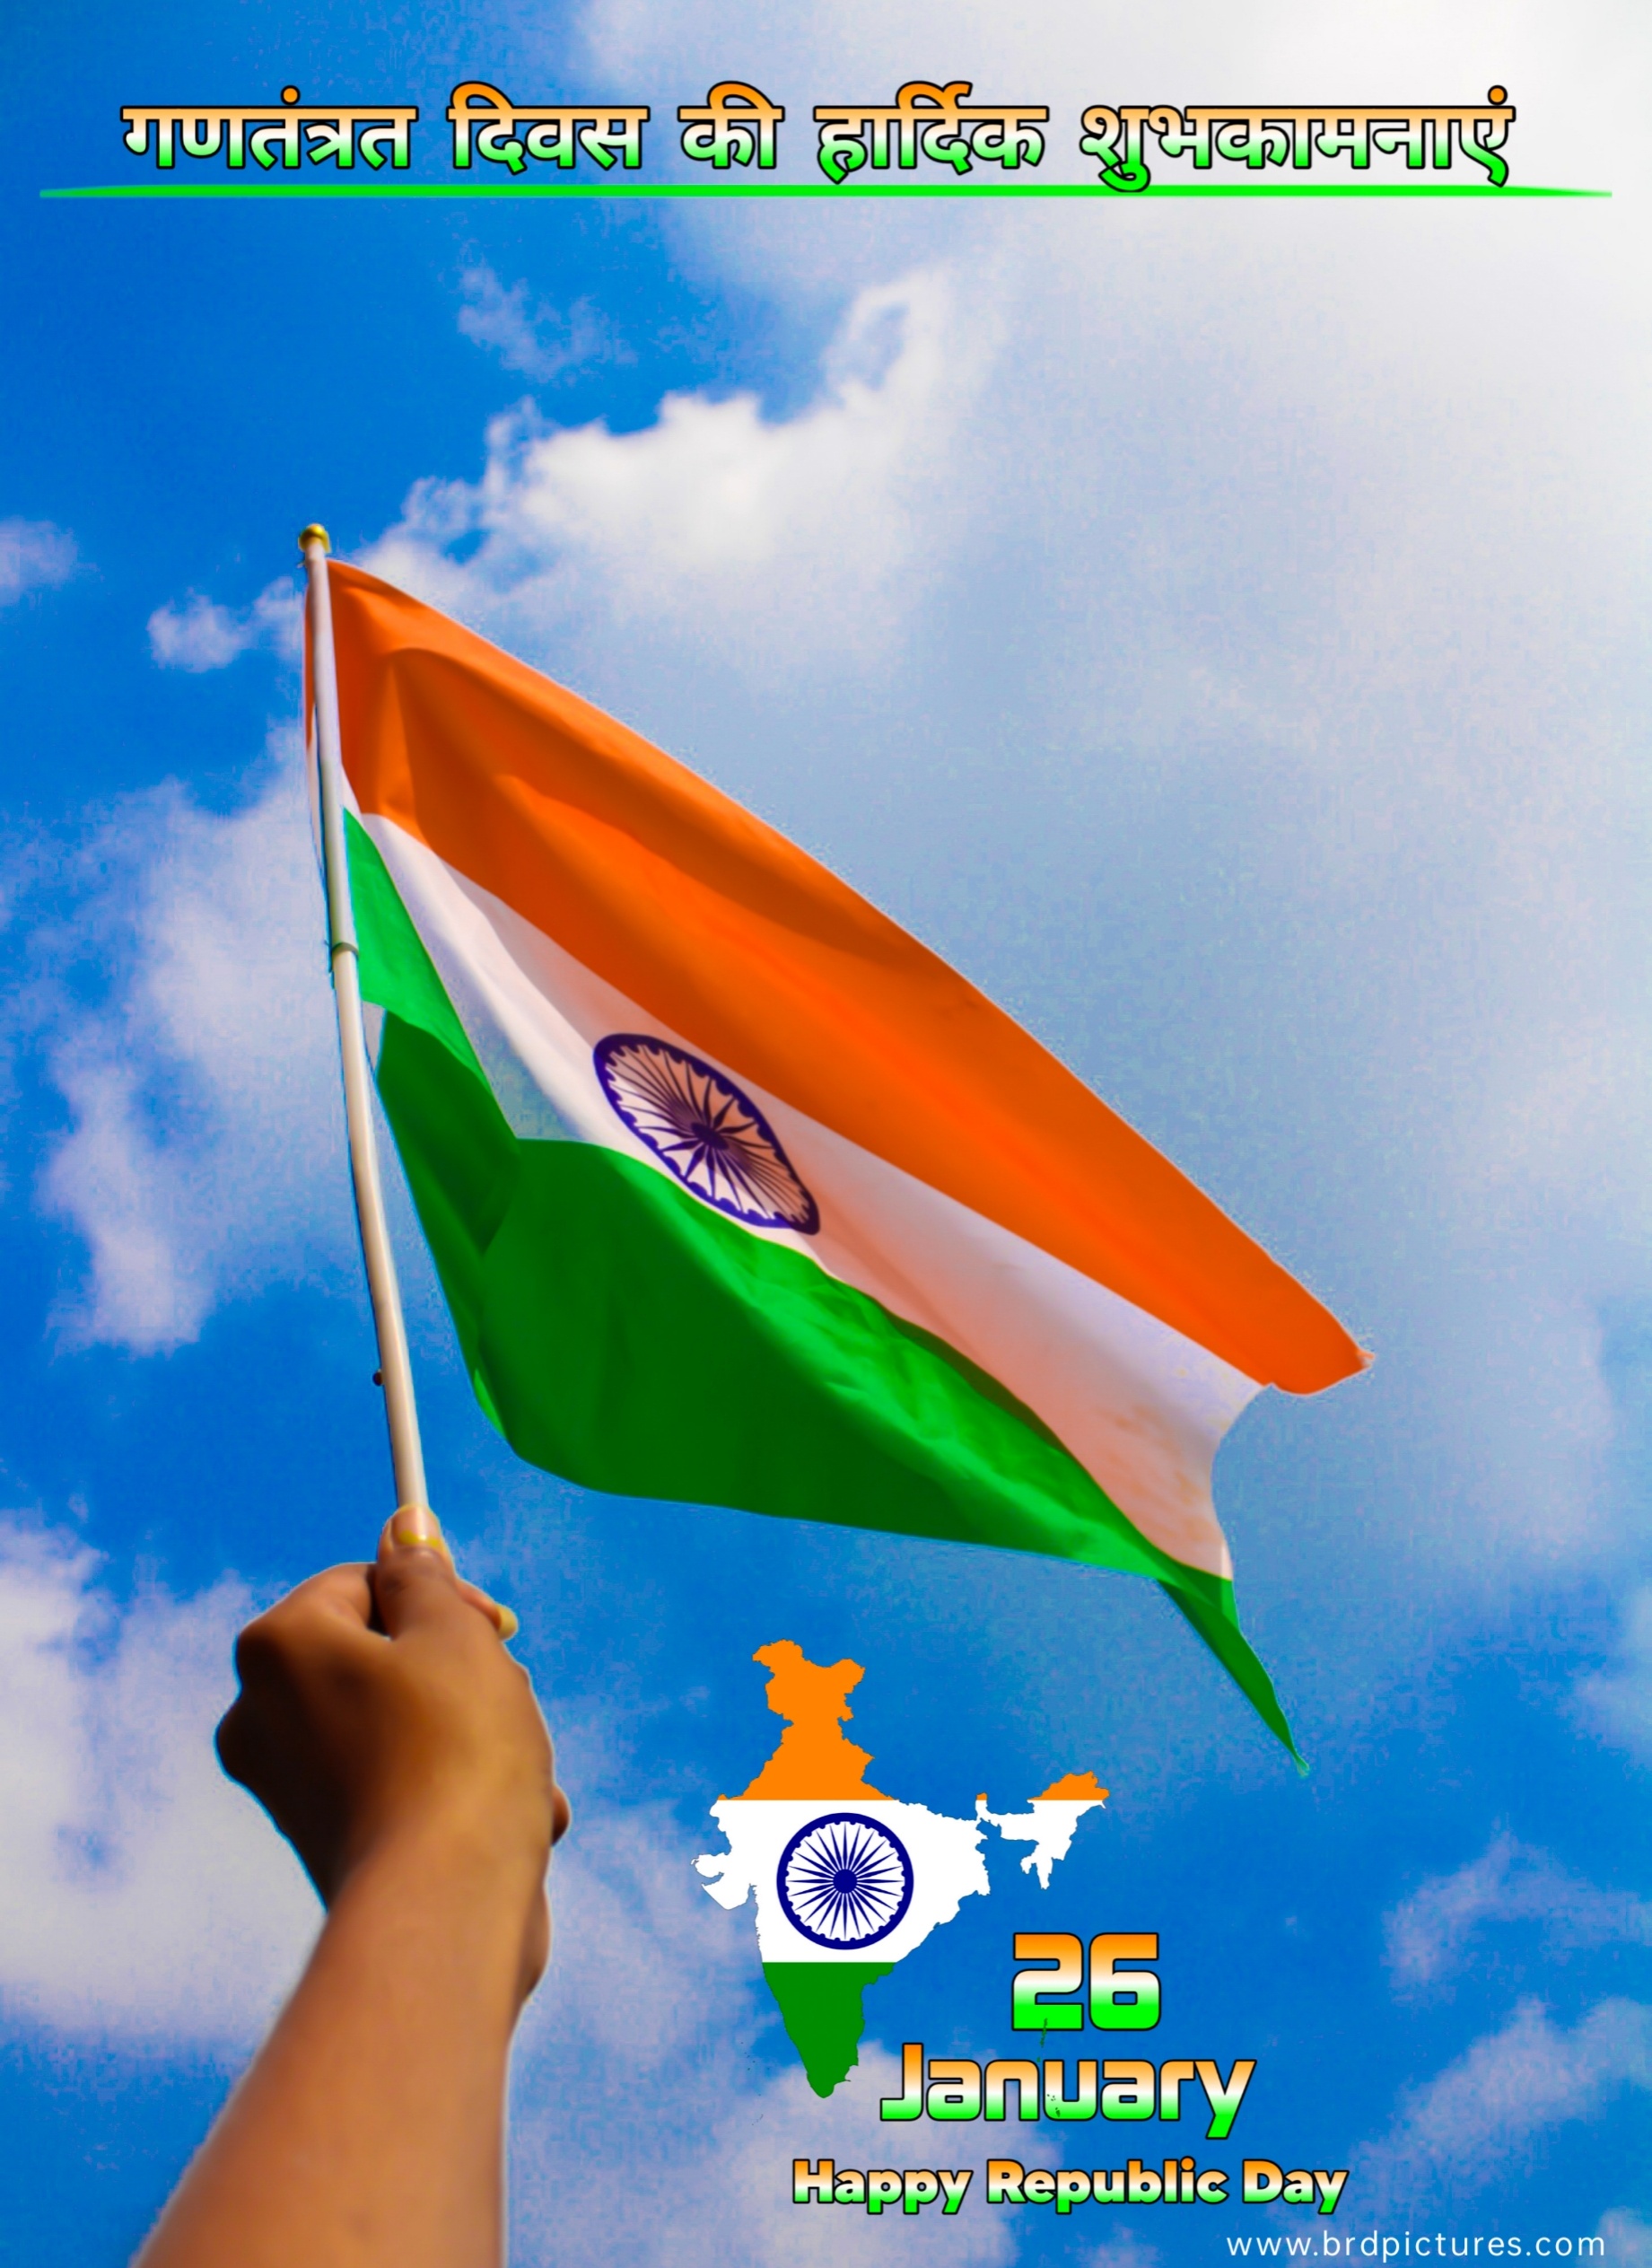 600+ Republic Day 26 January Images And Photos HD Download - BRD Pictures